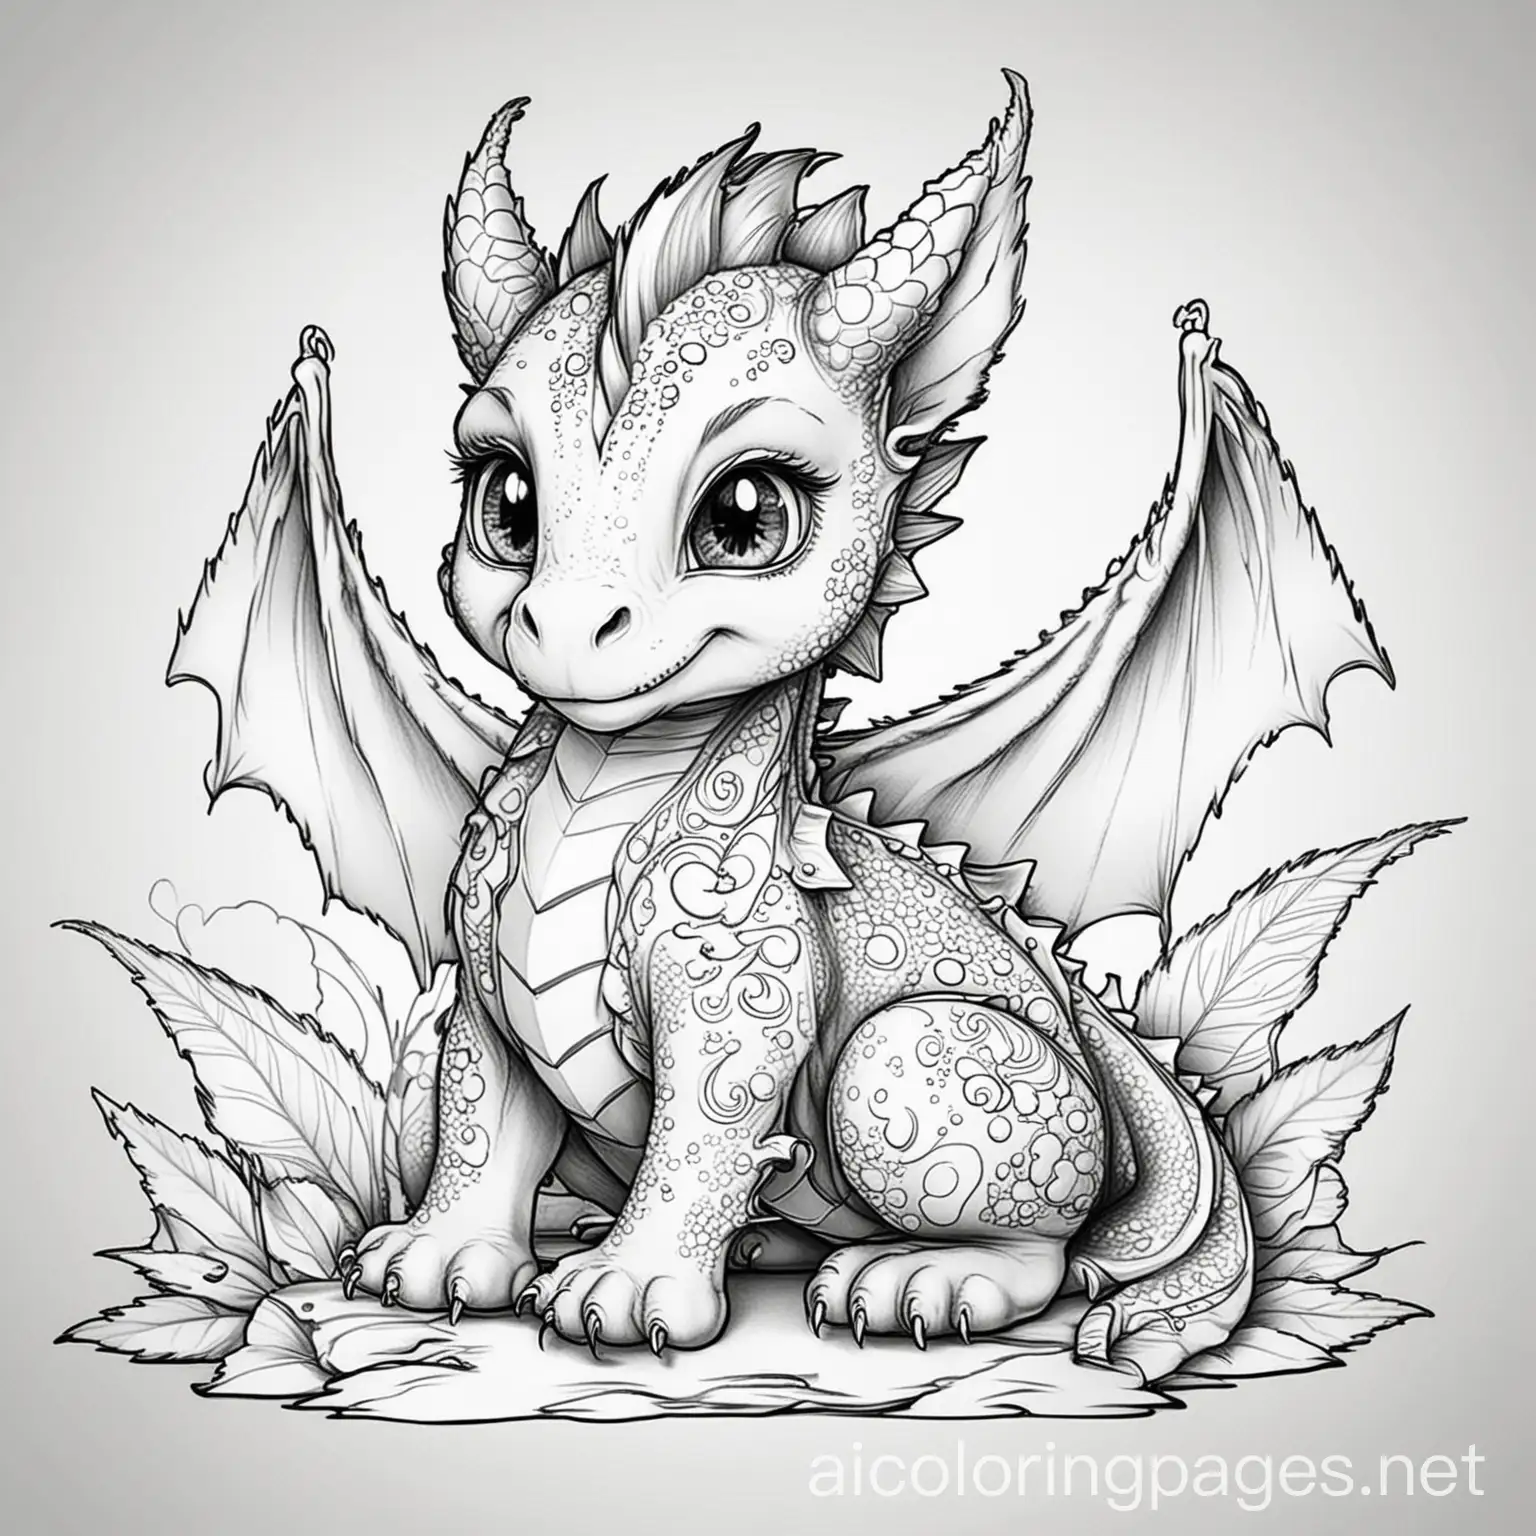 Baby Dragon Coloring Pages for Adults and Kids, Coloring Page, black and white, line art, white background, Simplicity, Ample White Space. The background of the coloring page is plain white to make it easy for young children to color within the lines. The outlines of all the subjects are easy to distinguish, making it simple for kids to color without too much difficulty